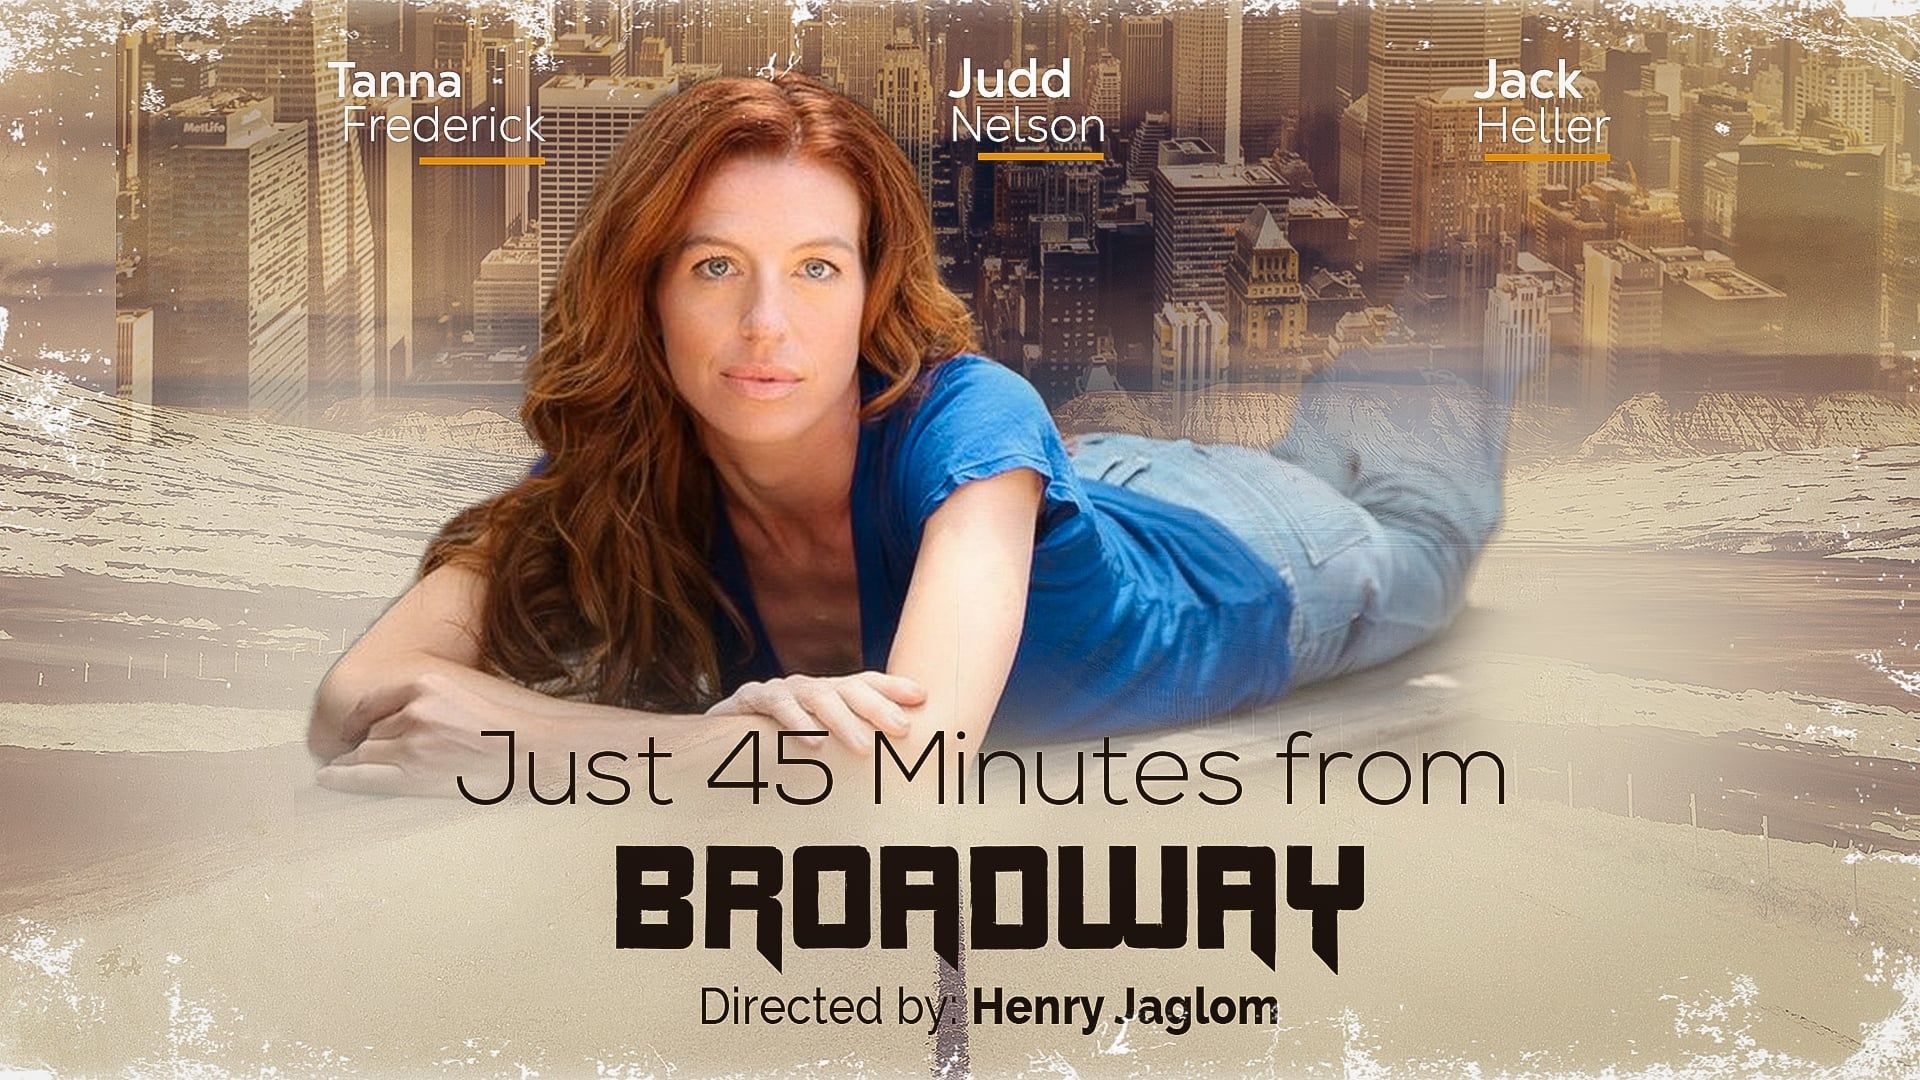 Just 45 Minutes from Broadway background